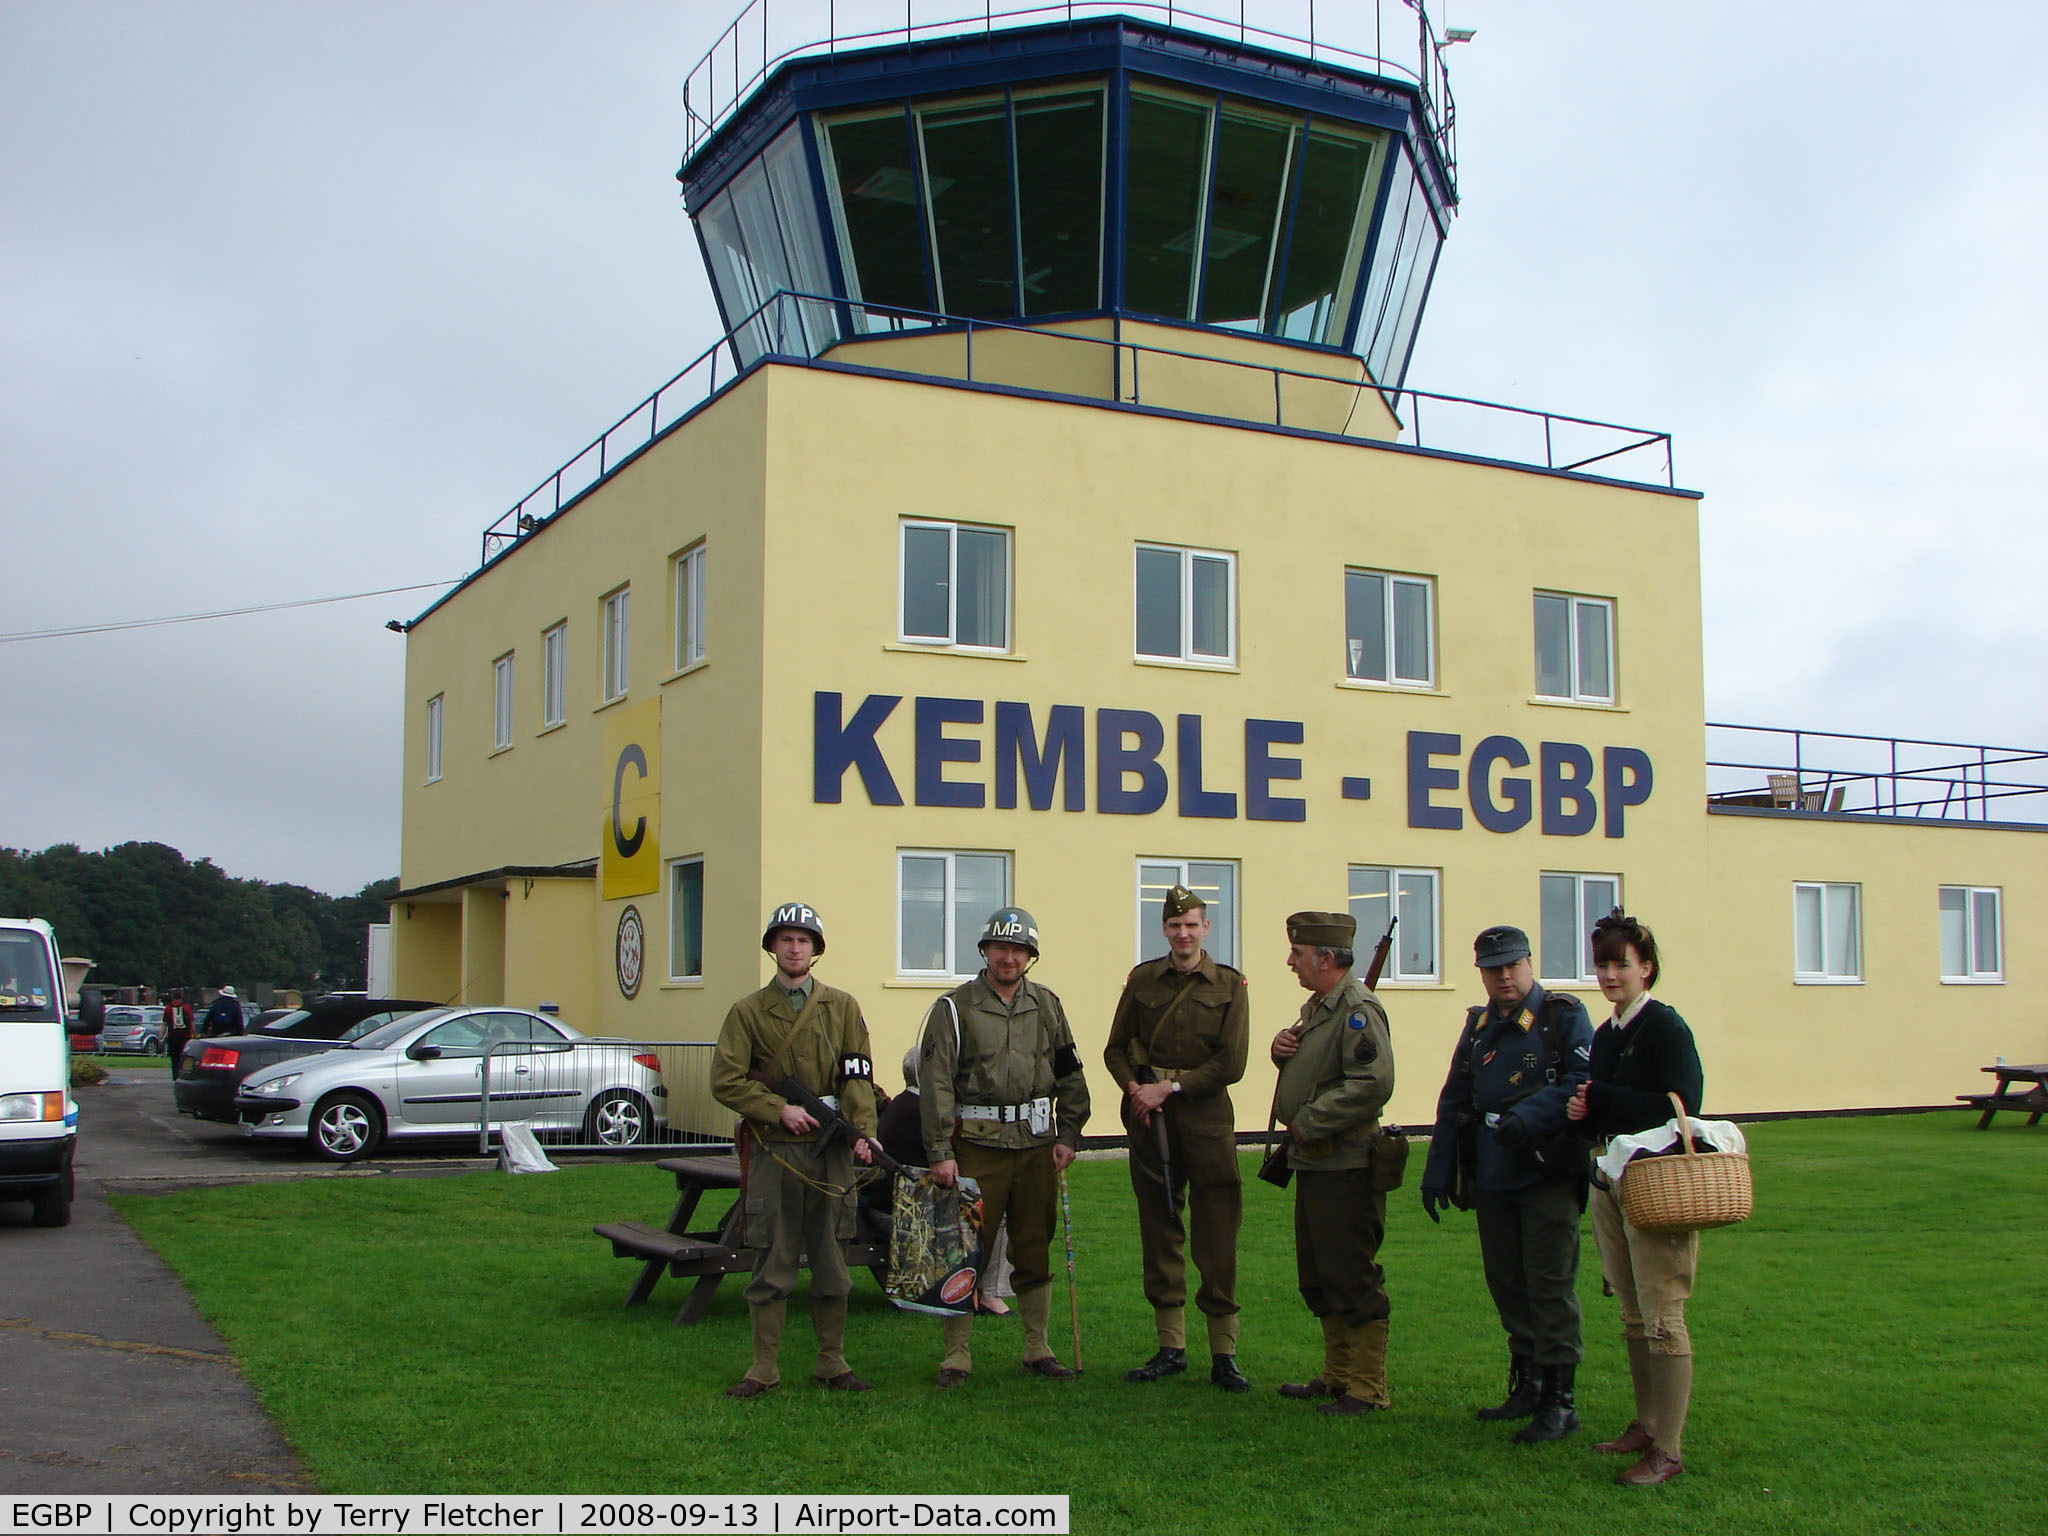 Kemble Airport, Kemble, England United Kingdom (EGBP) - 1940s Cloyhing was the order of the day at the Kemble 2008 battle of Britain Open Day